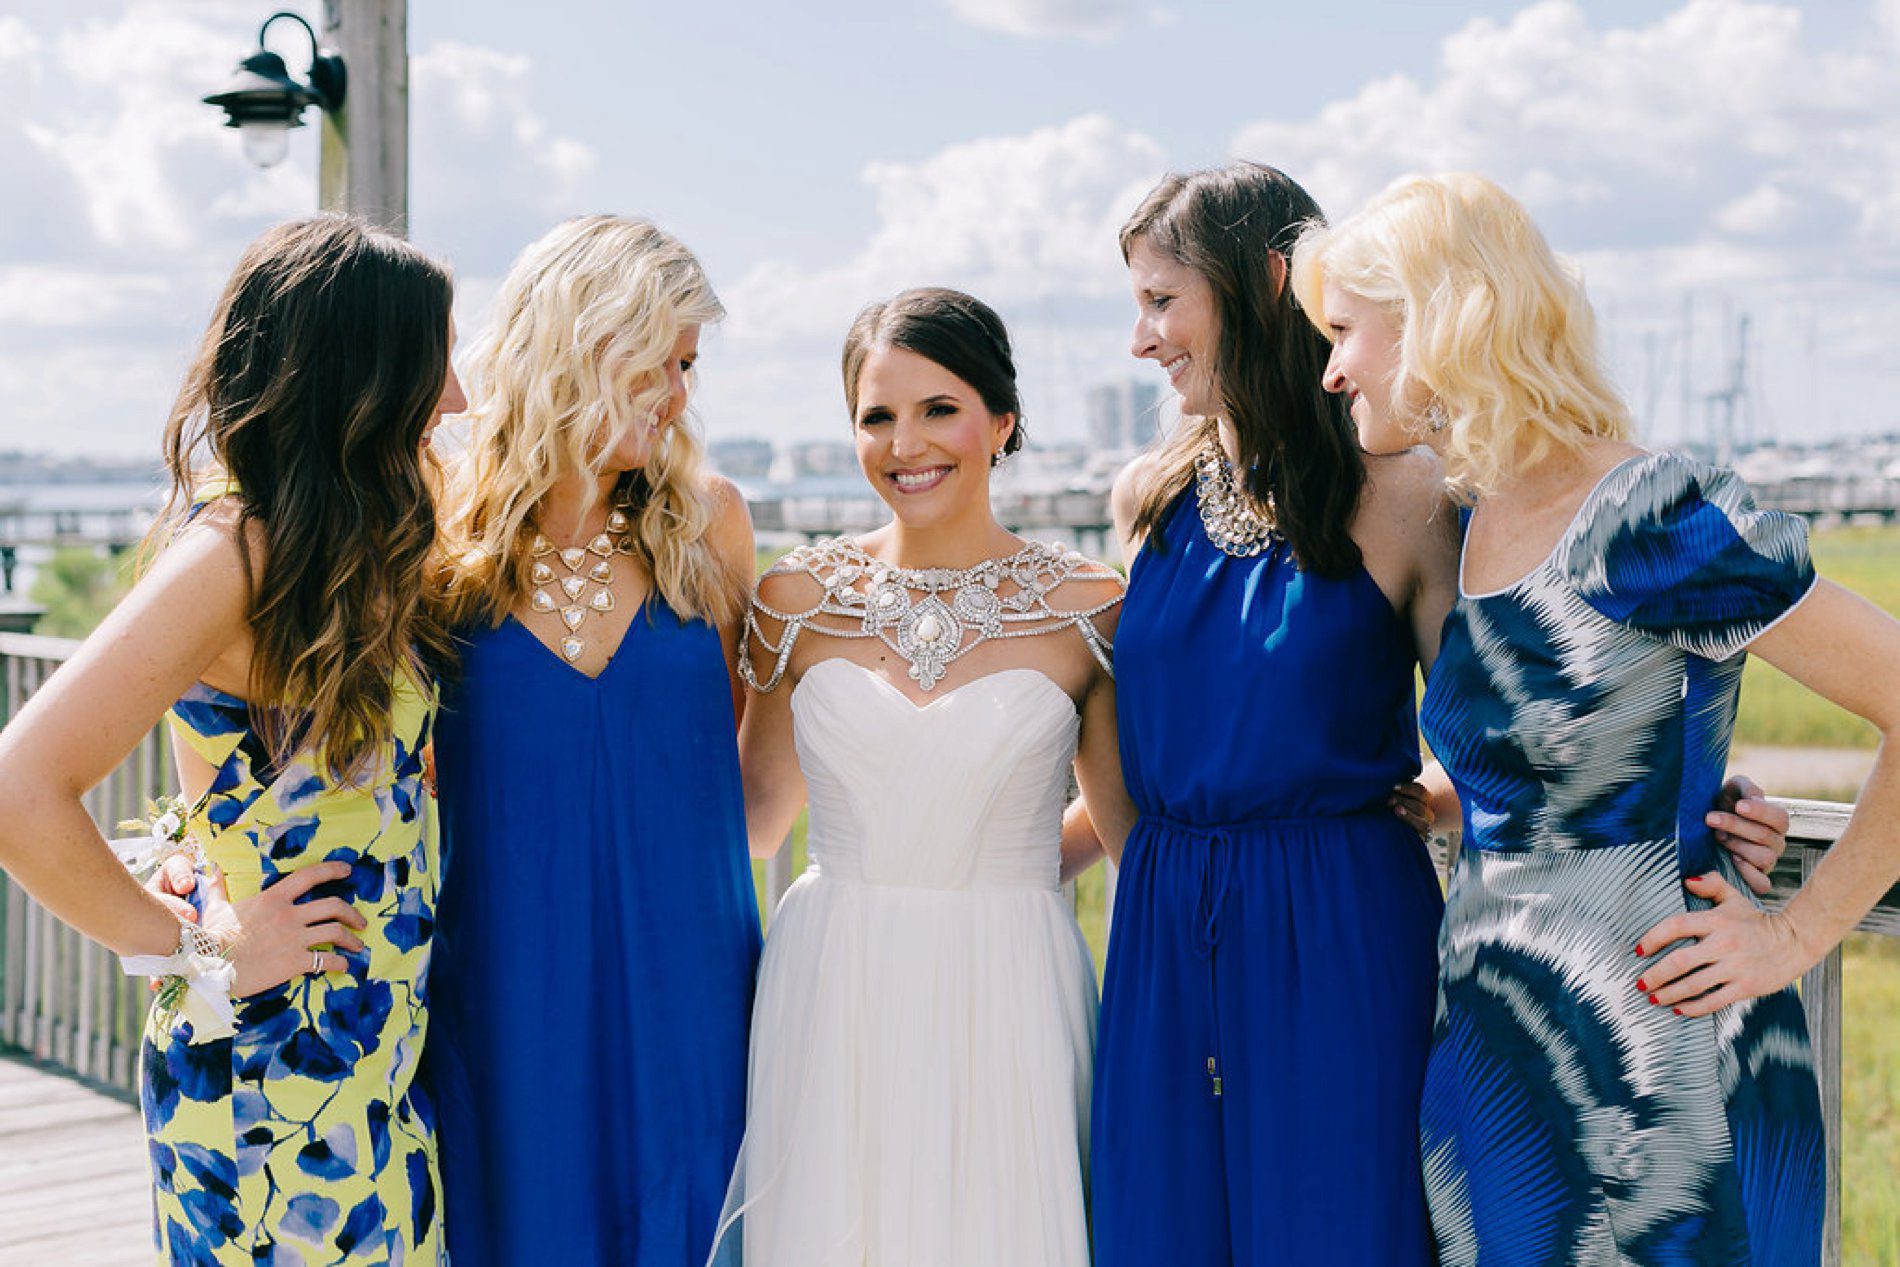 mix and match bridesmaids outfits in blue